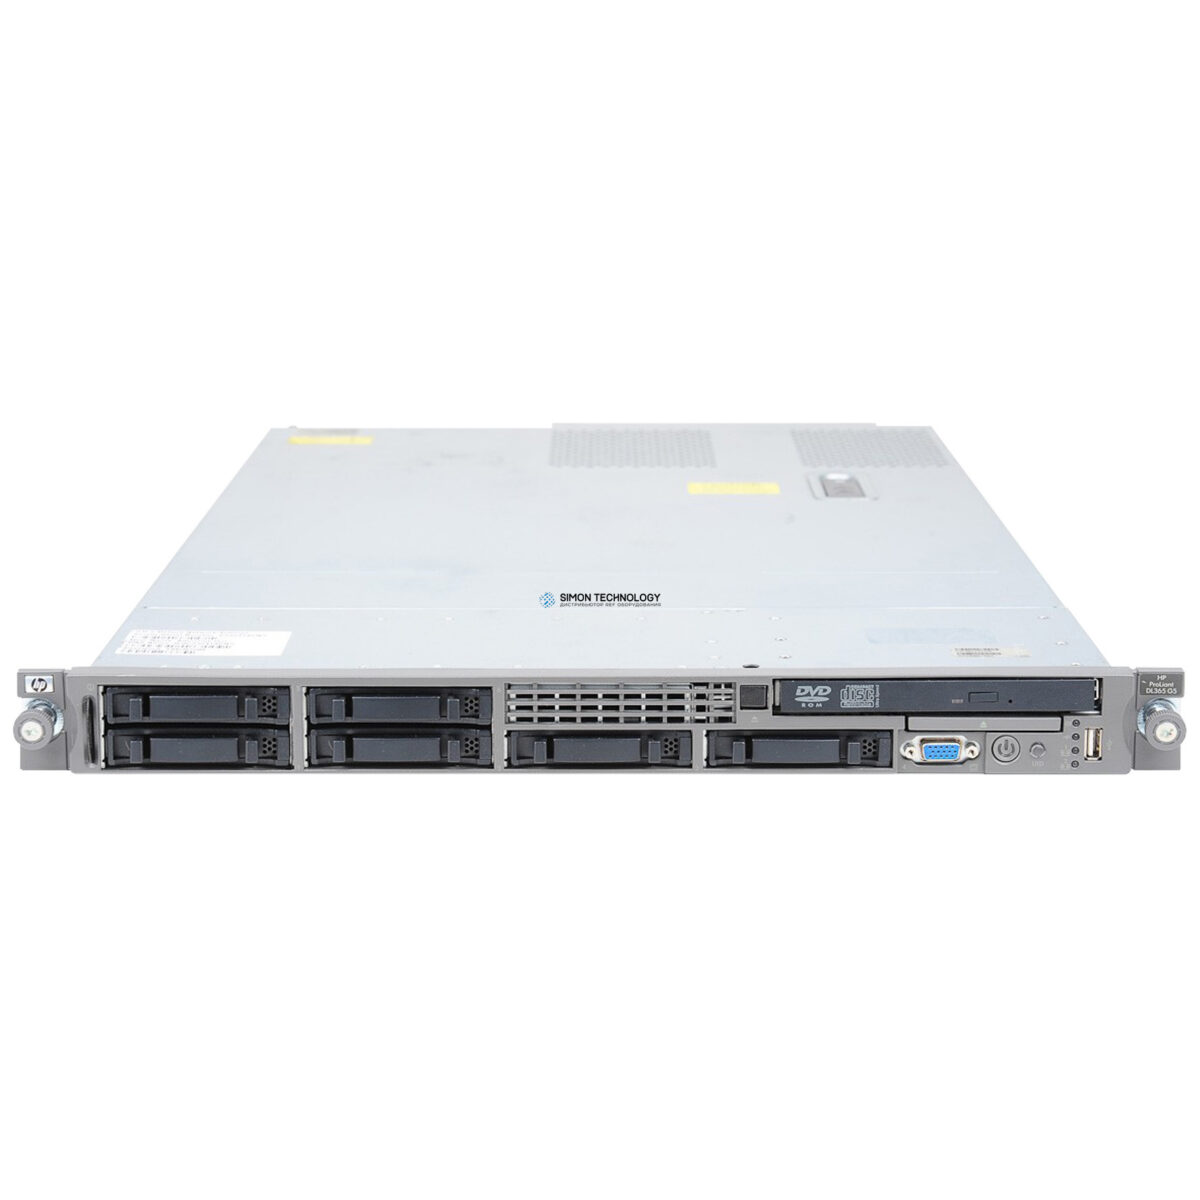 Сервер HP DL365 G5 CONFIGURE-TO-ORDER RACK CHASSIS (454269-B21)